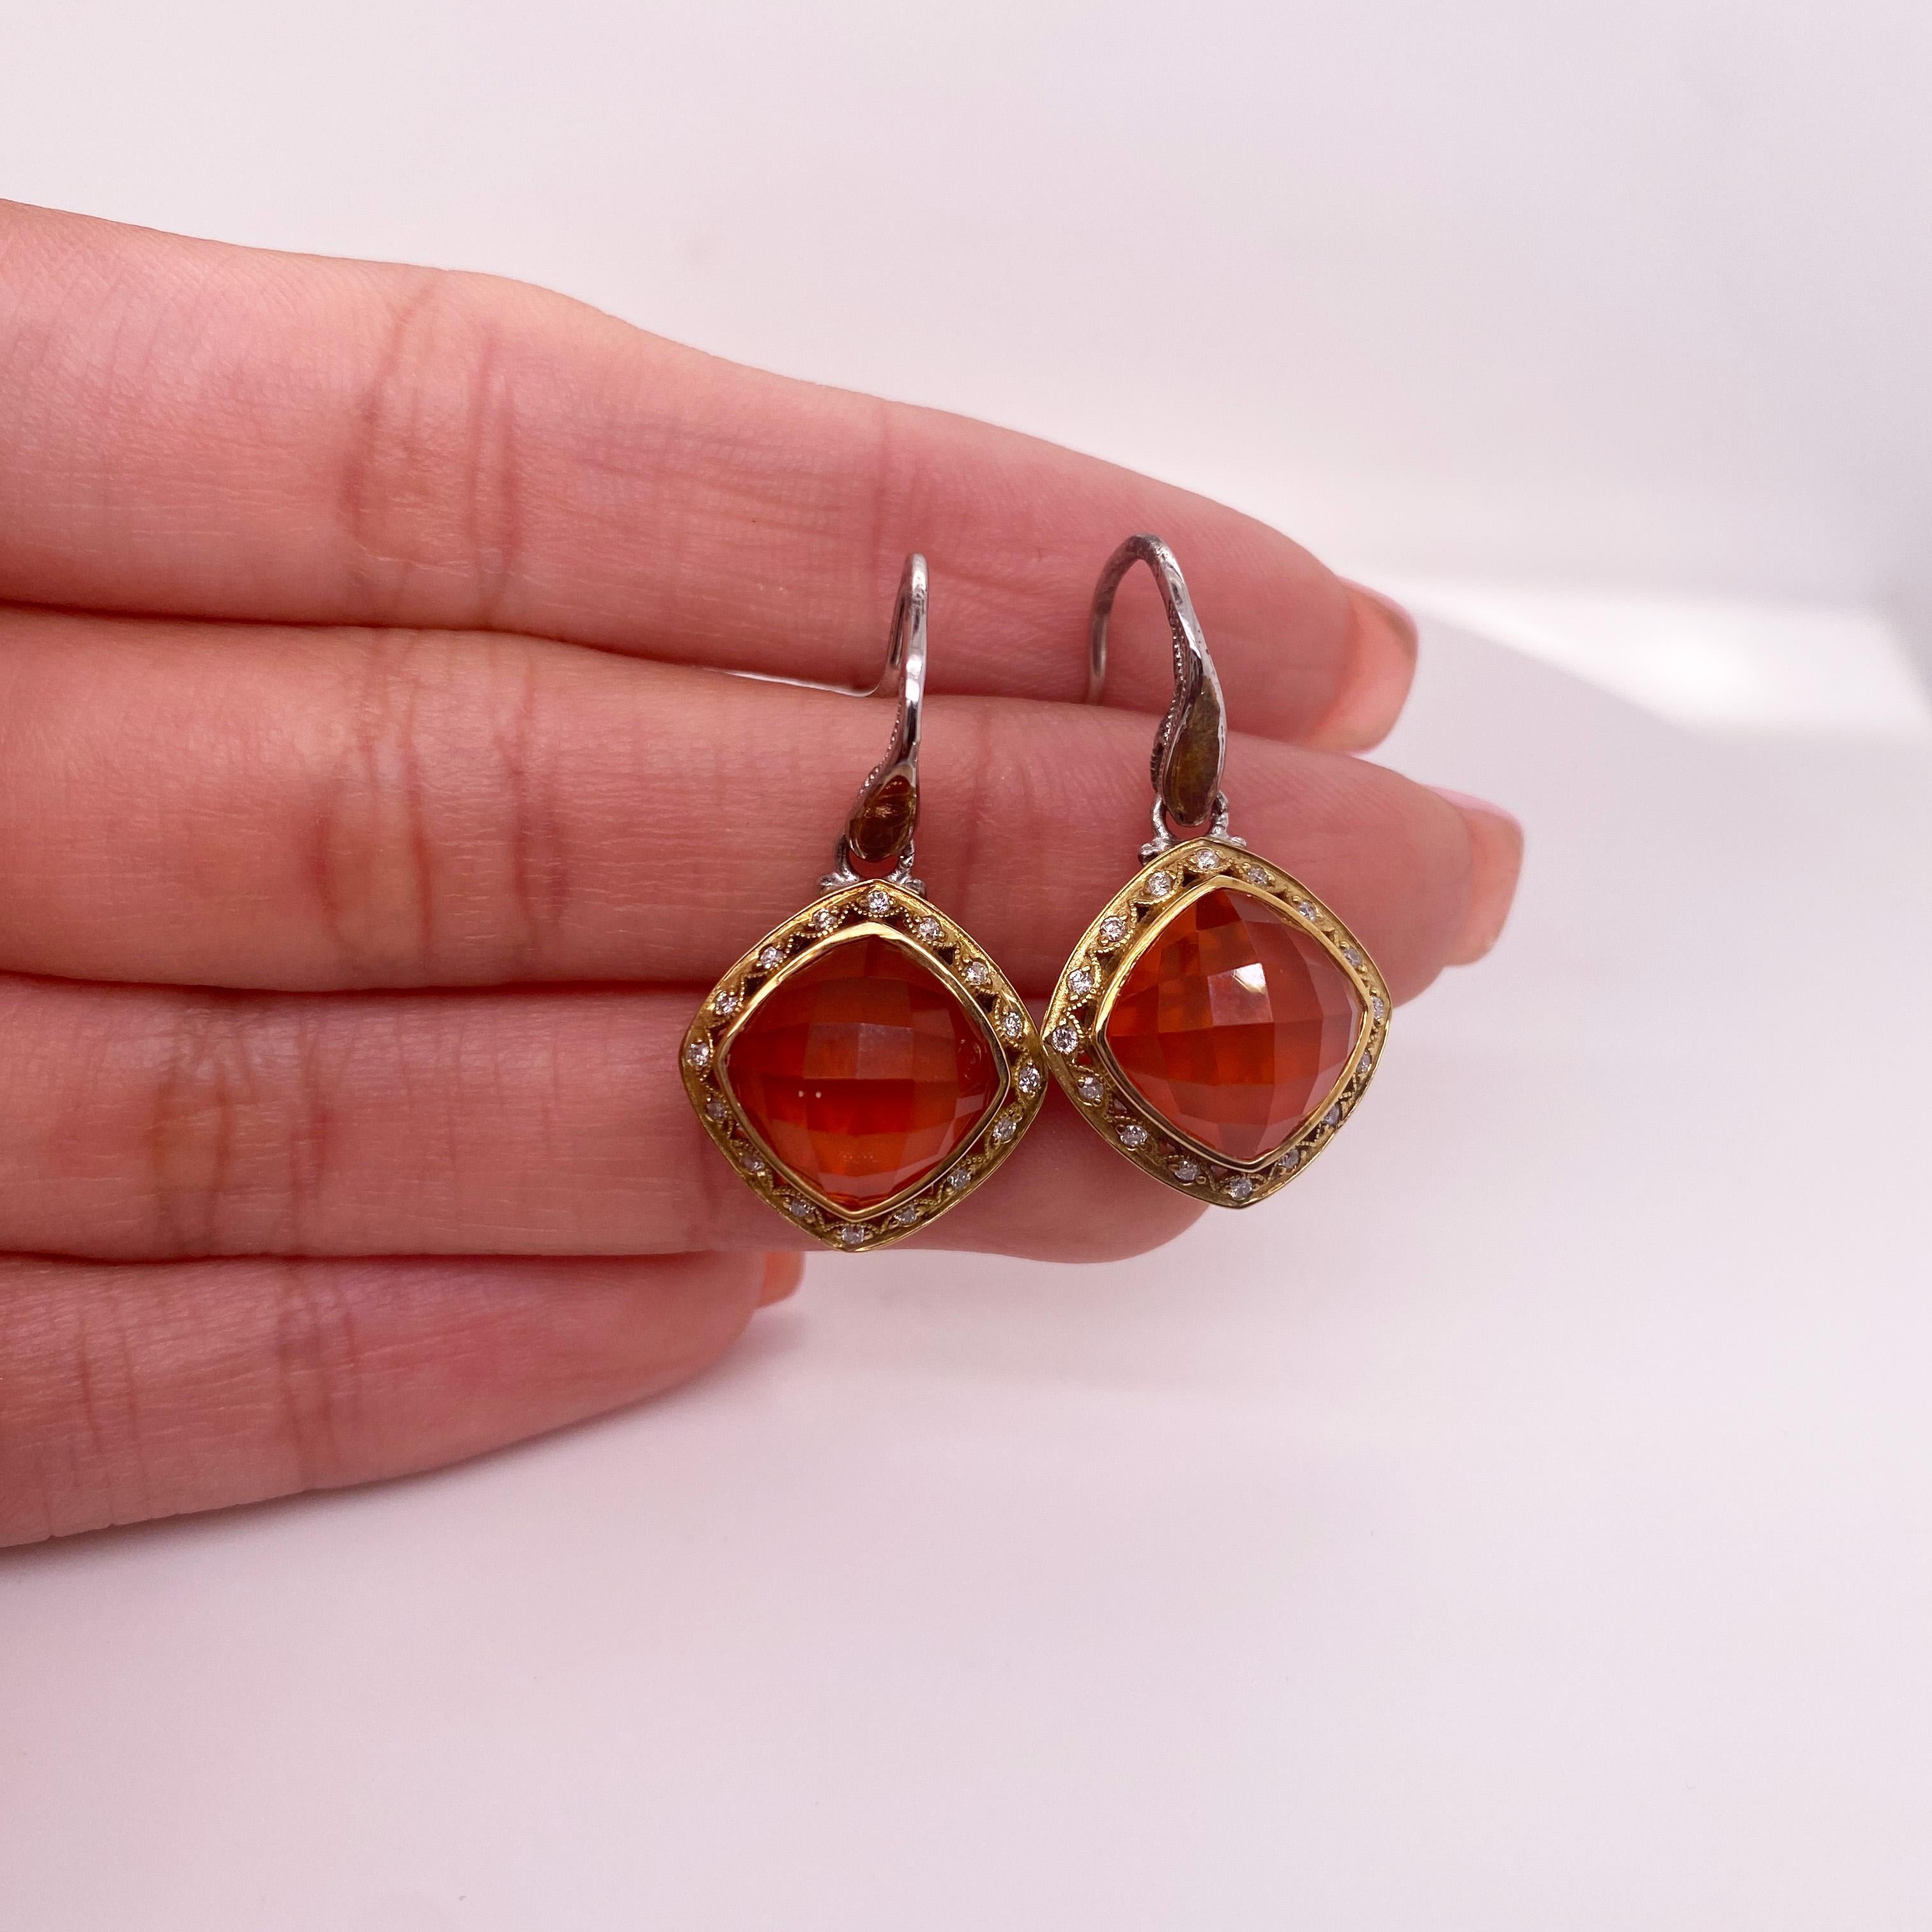 Iconic Tacori styling makes these mixed metal earrings perfect for any dressed up or down occasion! The stunning center is quartz over red onyx that seems to always glow like an ember from a fire. Gracefully textured crescents in 18 karat yellow